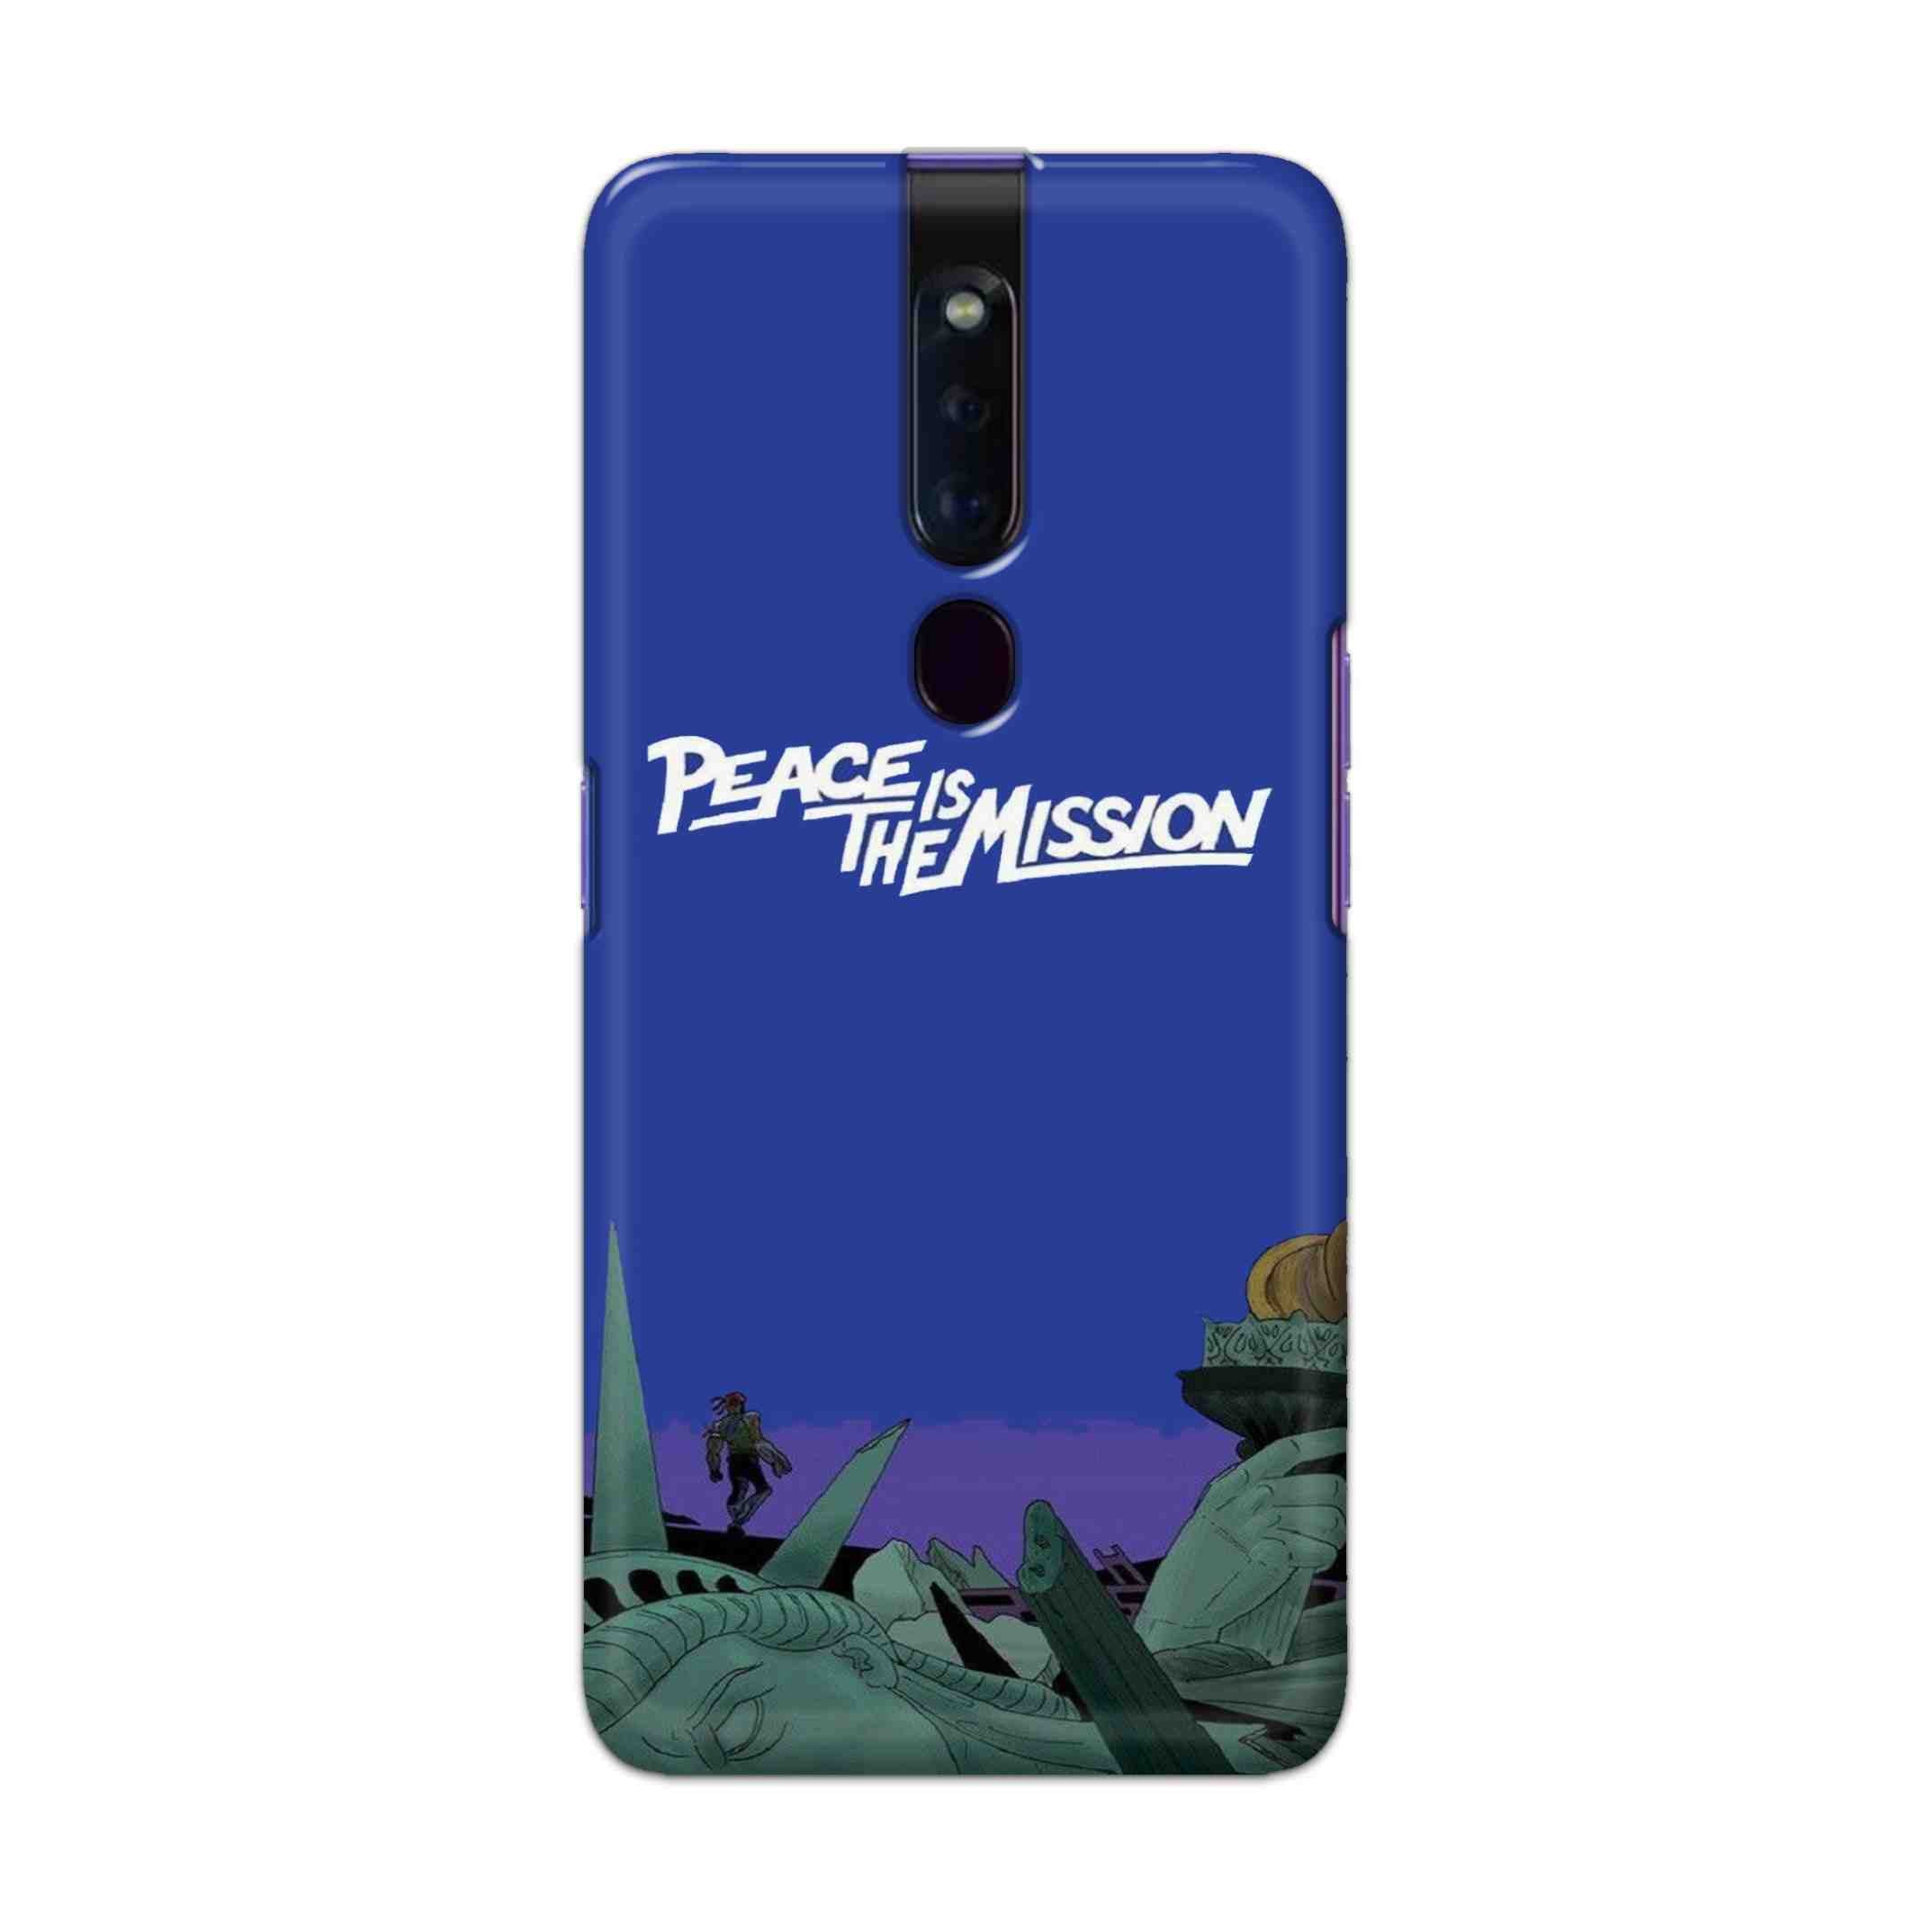 Buy Peace Is The Misson Hard Back Mobile Phone Case Cover For Oppo F11 Pro Online